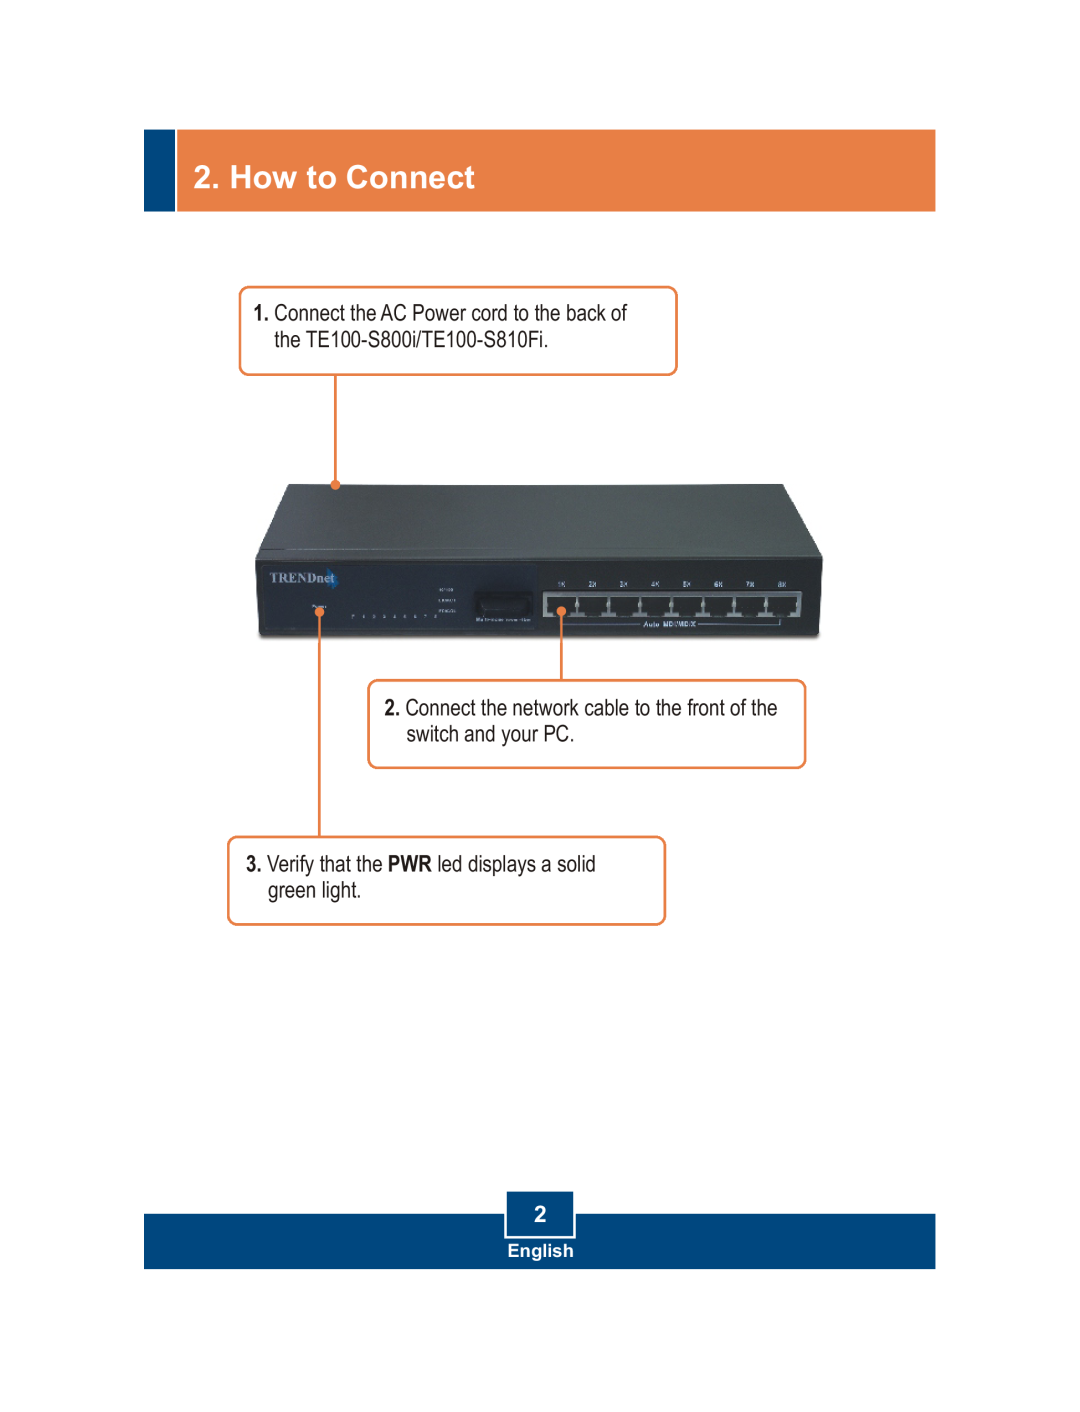 TRENDnet S800i manual How to Connect, Connect the network cable to the front of the switch and your PC, English 